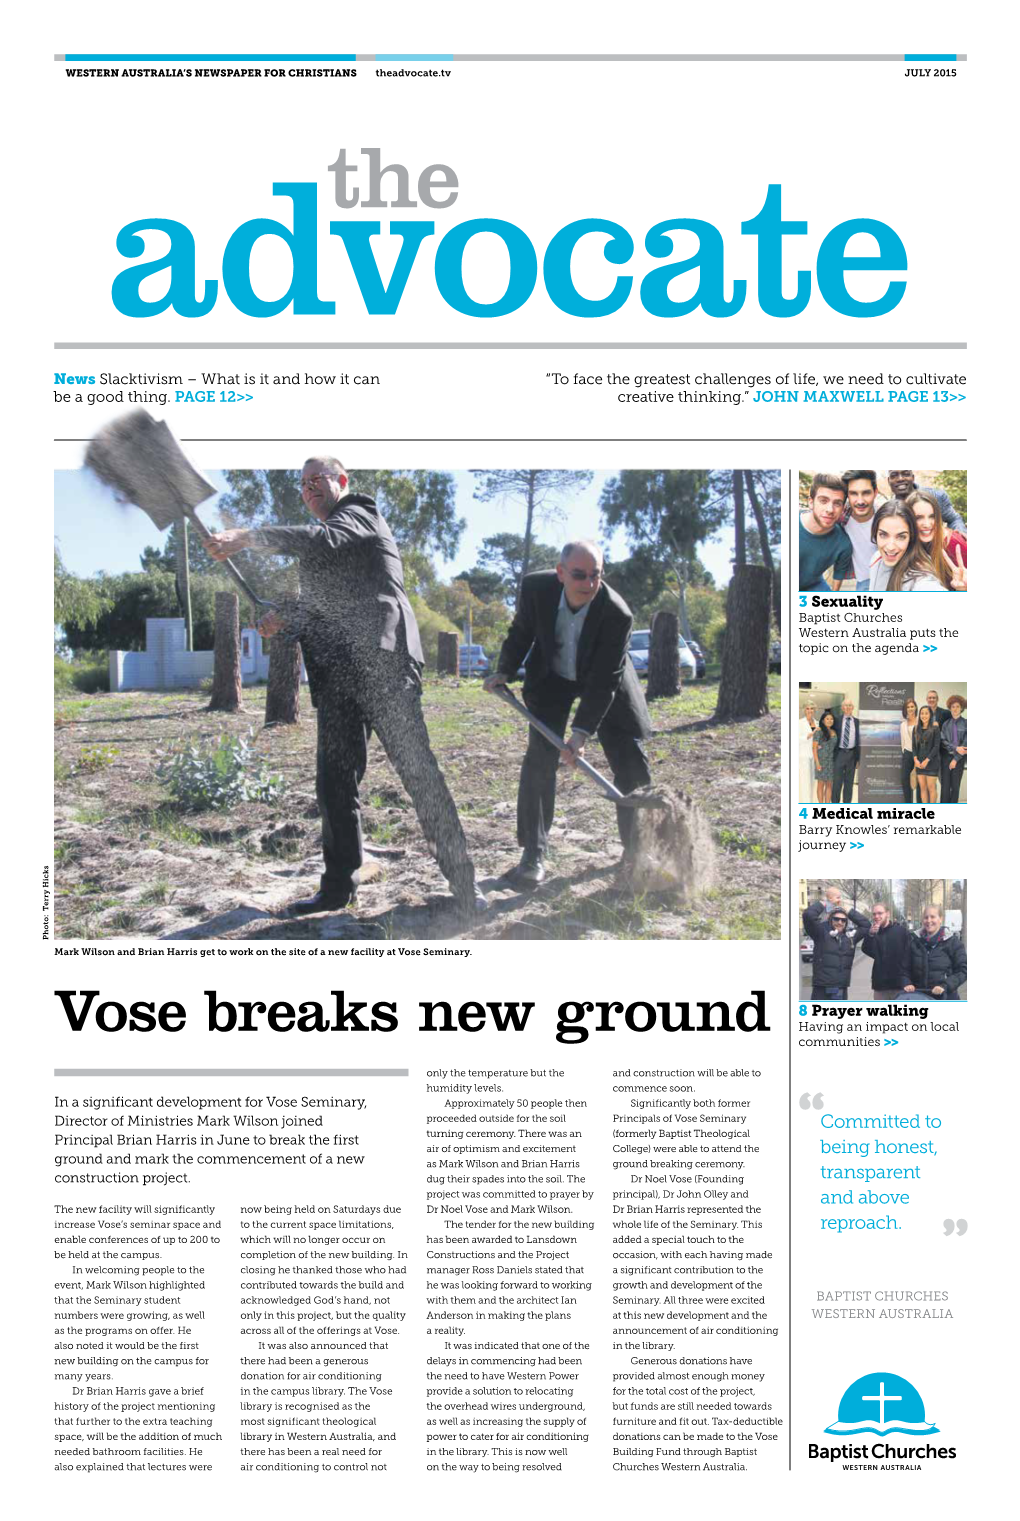 Vose Breaks New Ground Having an Impact on Local Communities >>